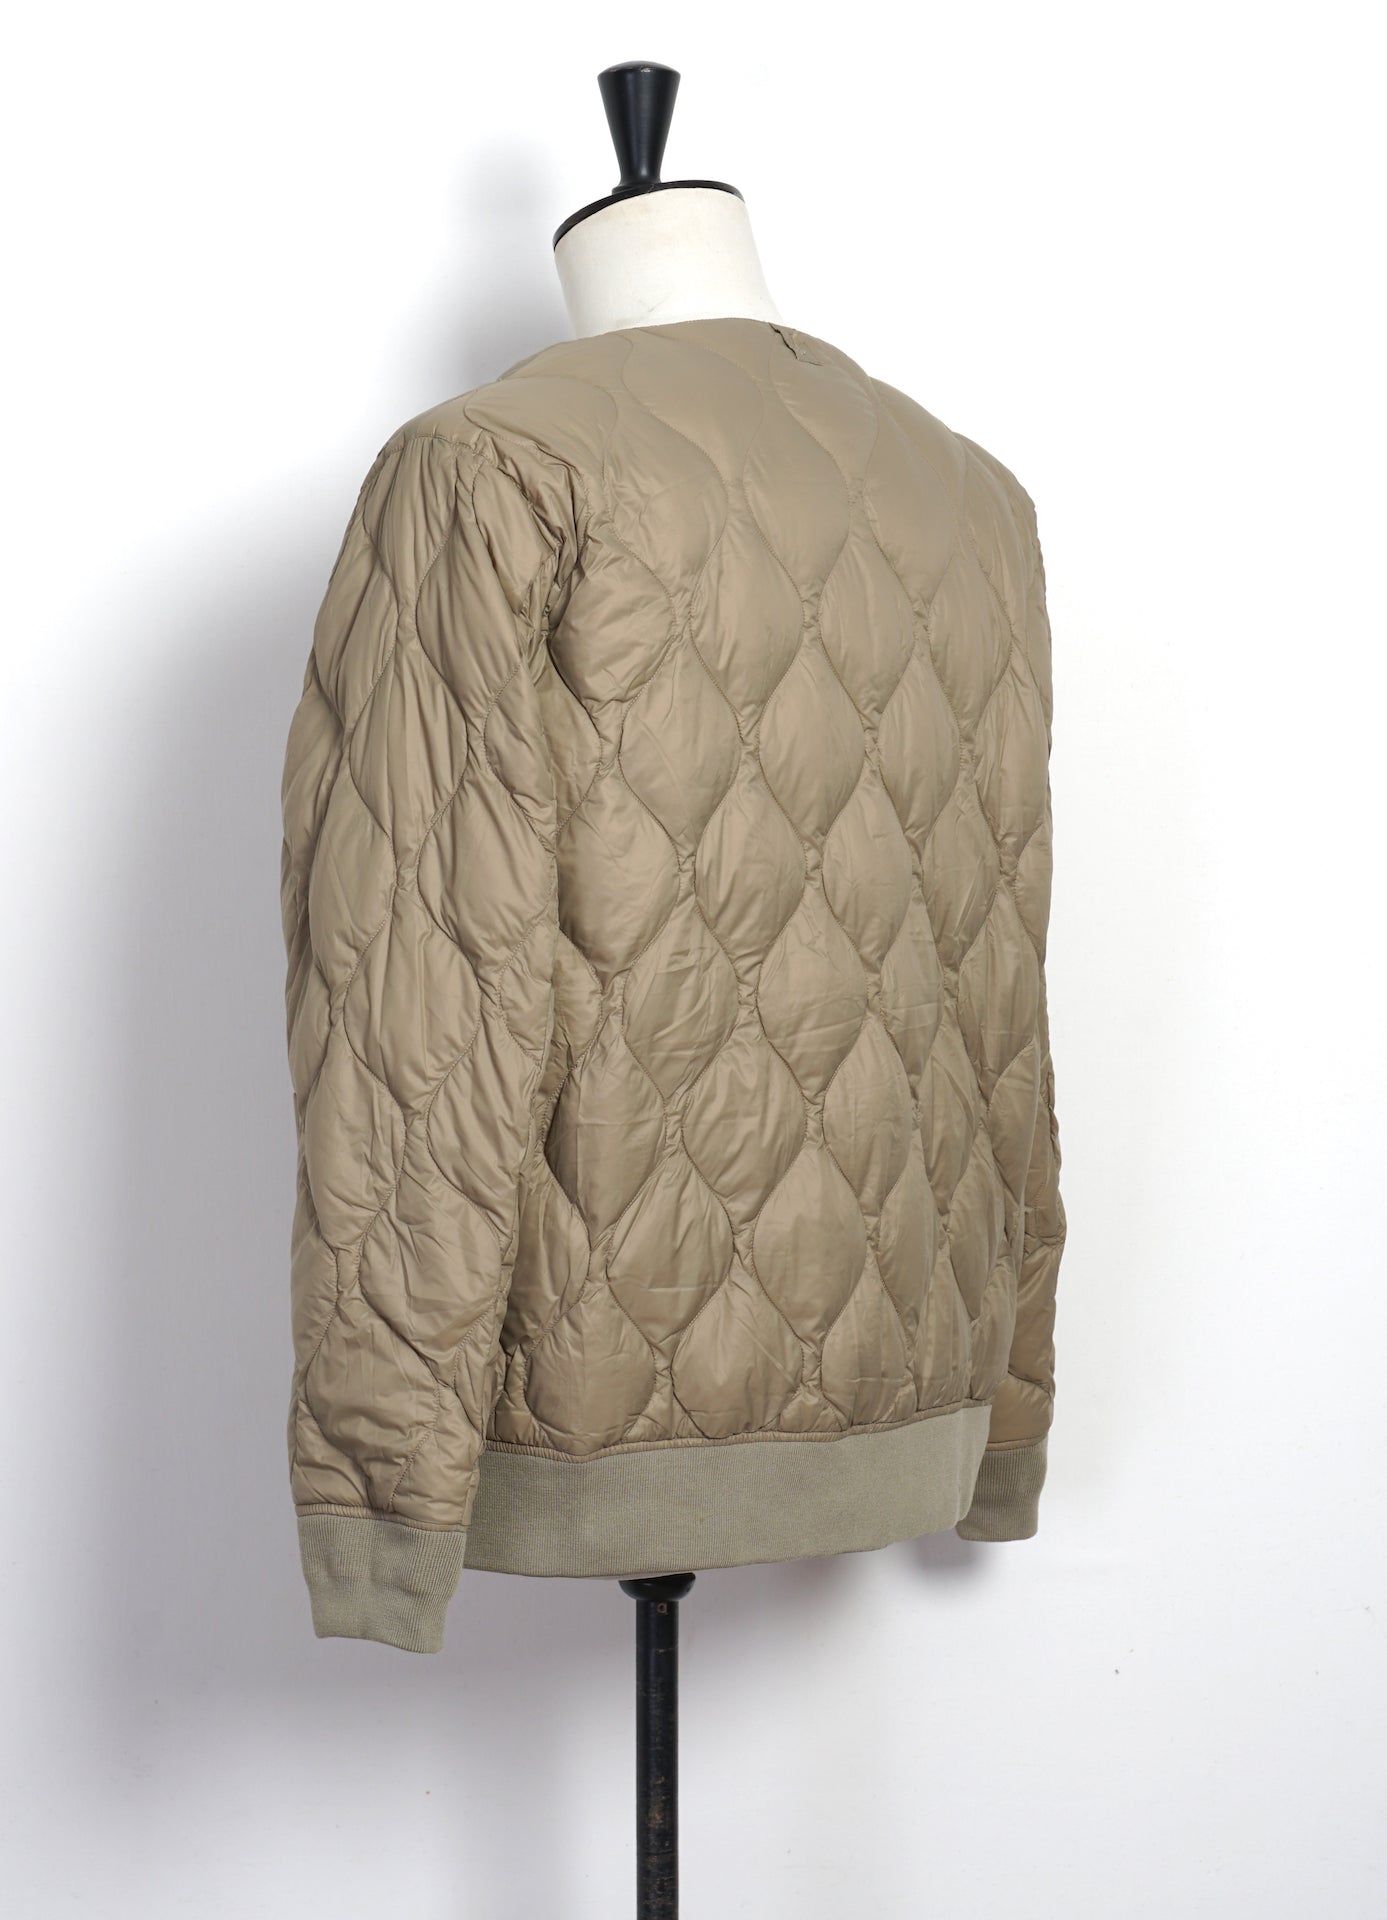 TAION x BEAMS | Reversible MA-1 Type Inner Down Jacket | Olive/Beige